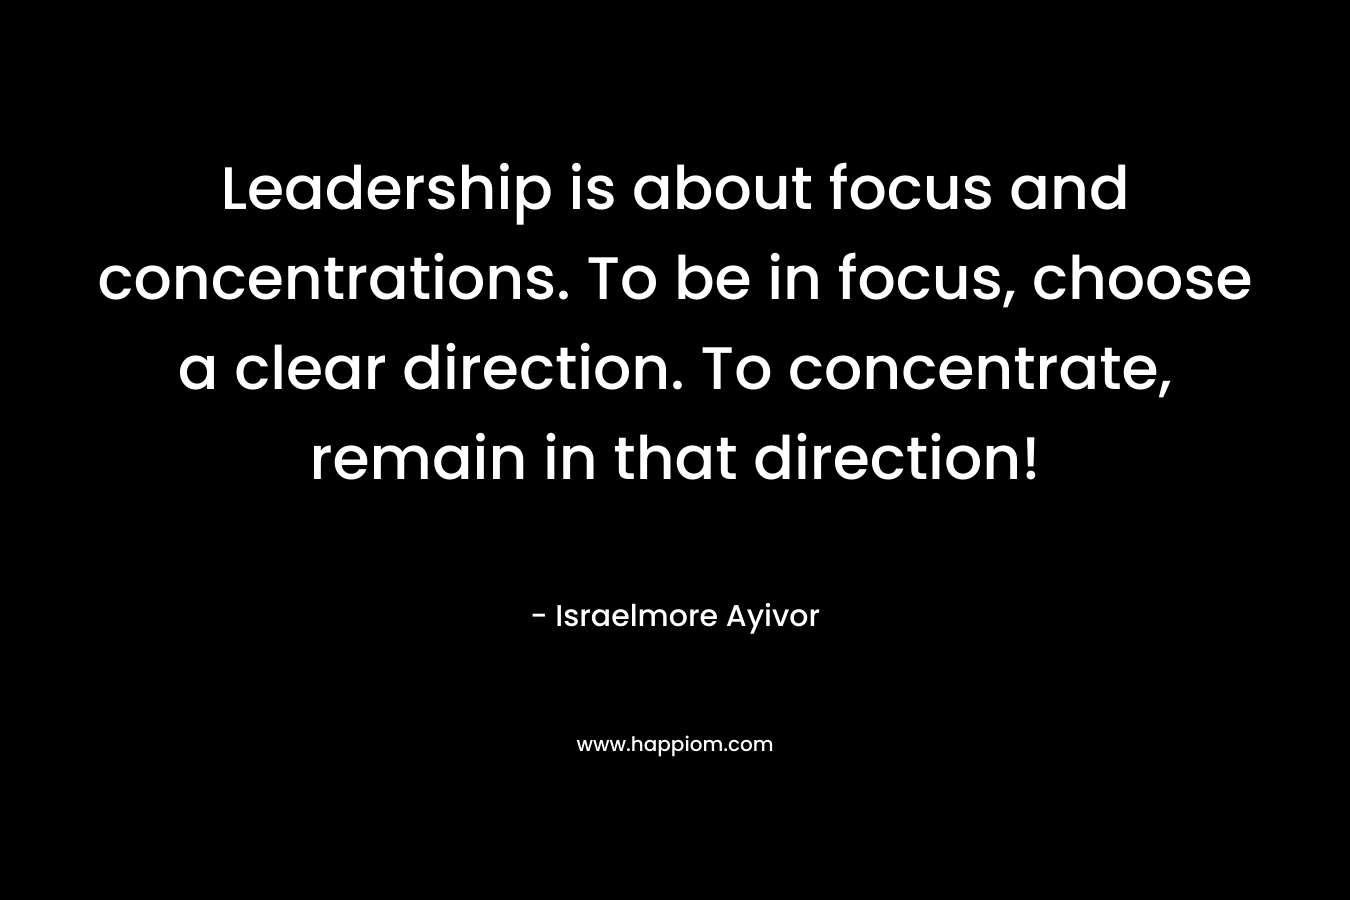 Leadership is about focus and concentrations. To be in focus, choose a clear direction. To concentrate, remain in that direction!